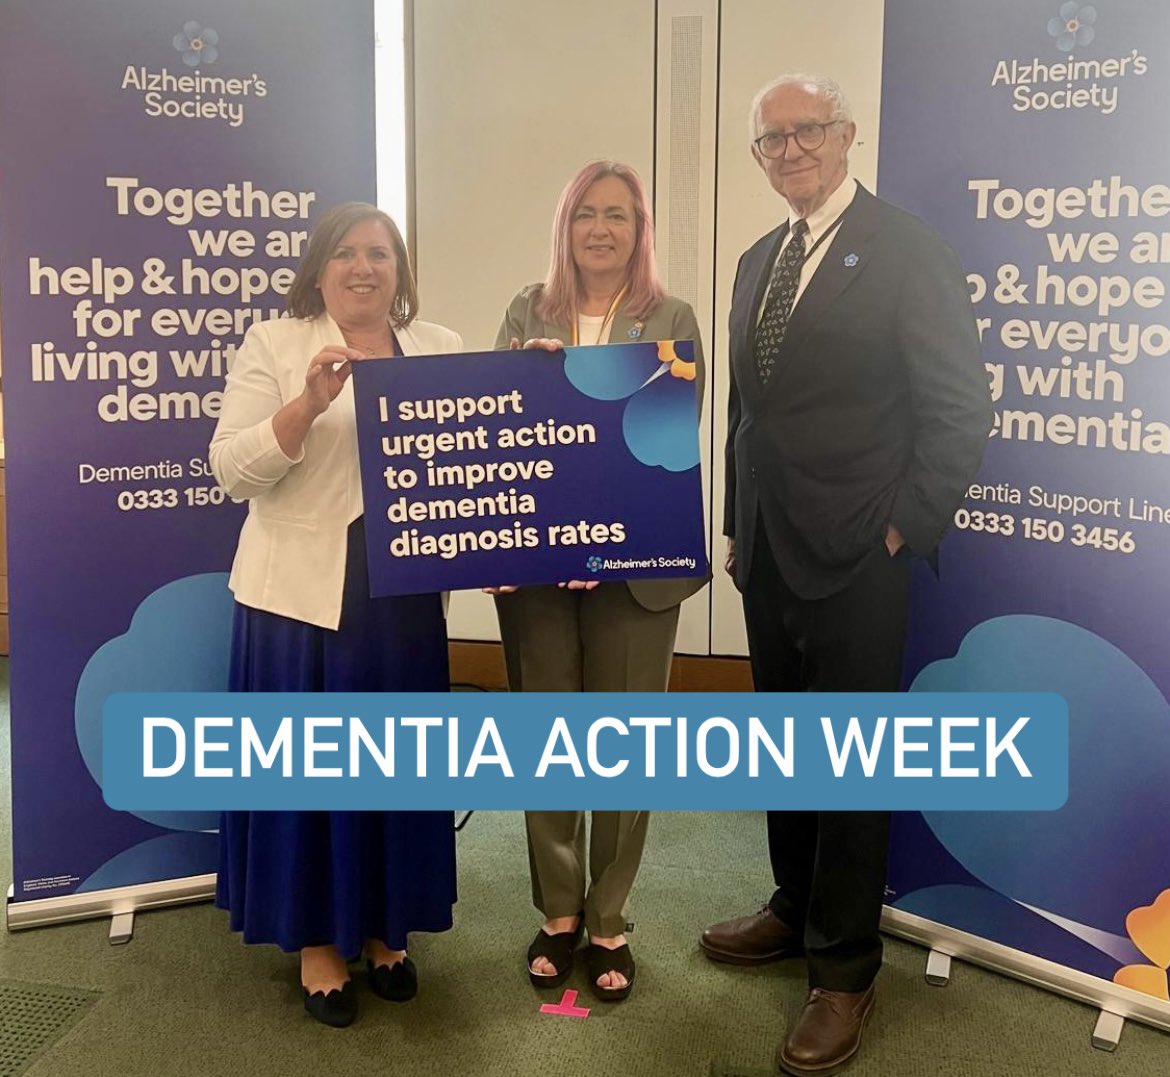 Pleased to meet with @alzheimerssoc and long time supporter Jonathan Pryce to discuss the need for renewed action to improve dementia diagnosis rates. Dementia is a debilitating illness and more must be done to drive forward investment in diagnosis. #DementiaActionWeek 💙